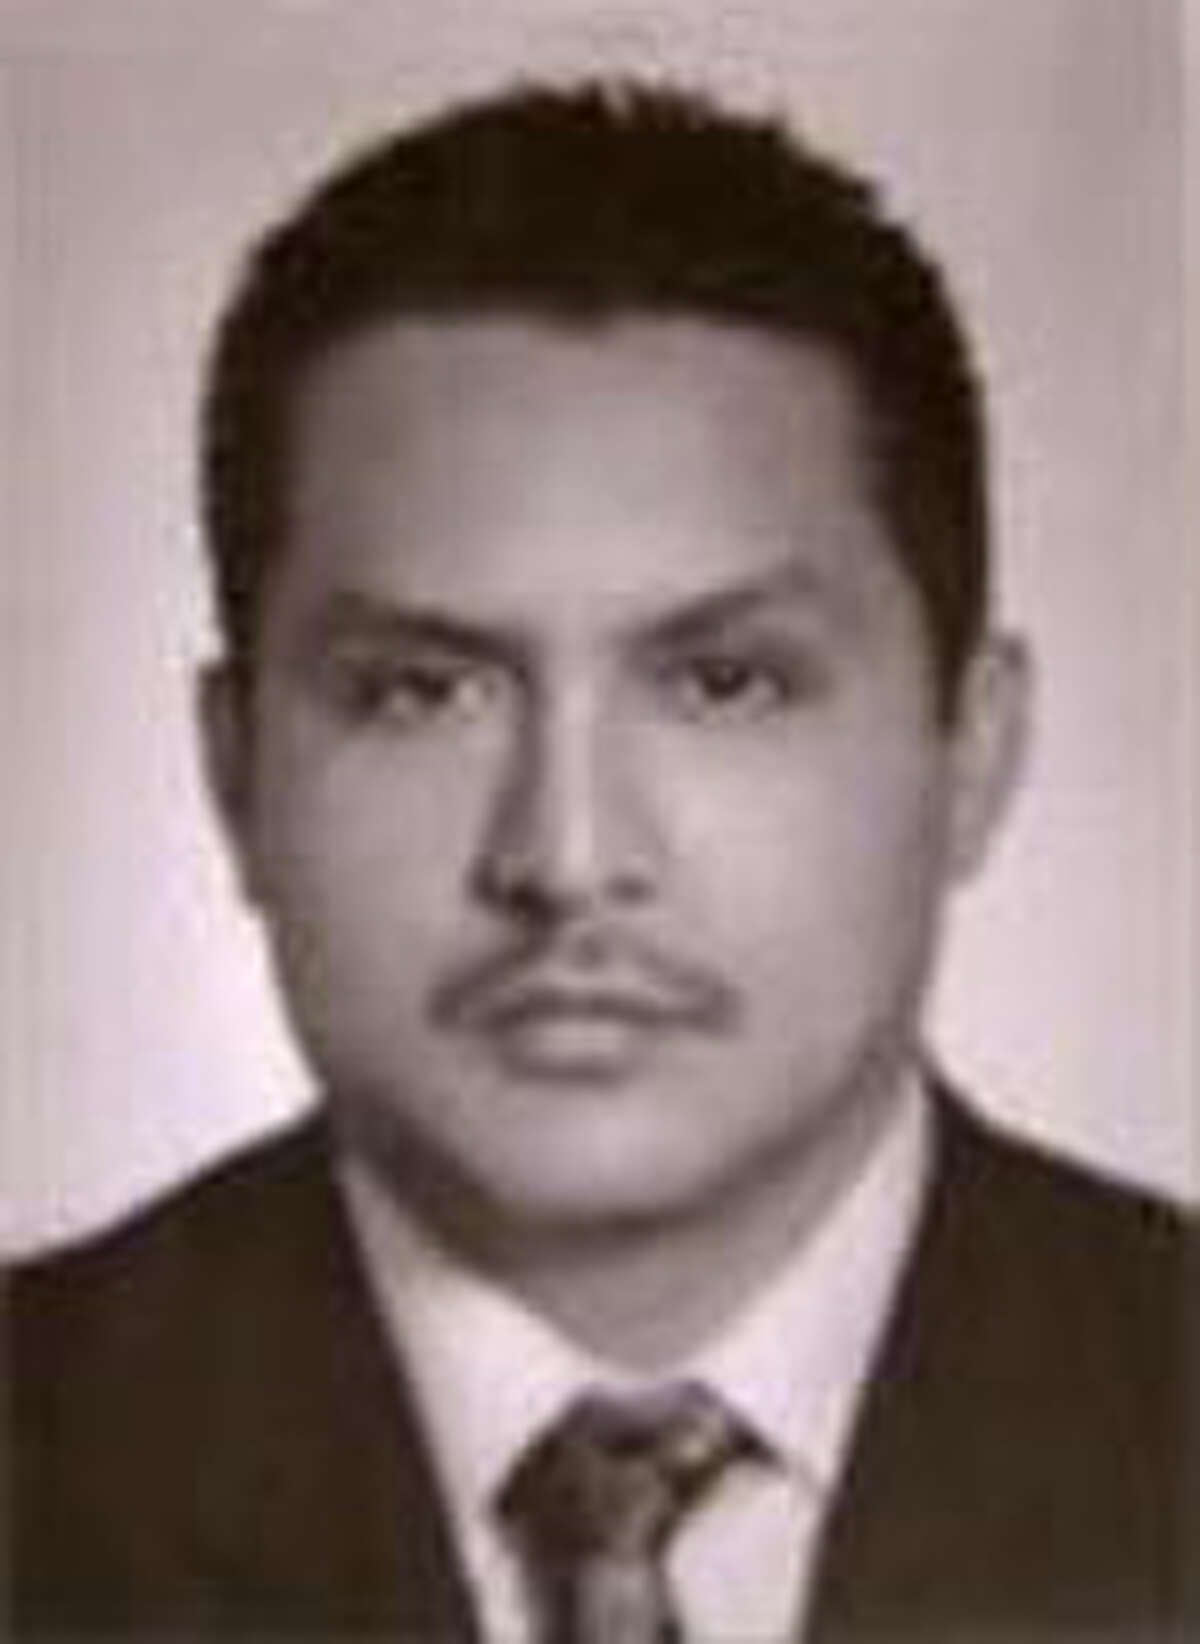 The Zetas’ second-in-command, Miguel Treviño Morales, is a fugitive in Mexico.